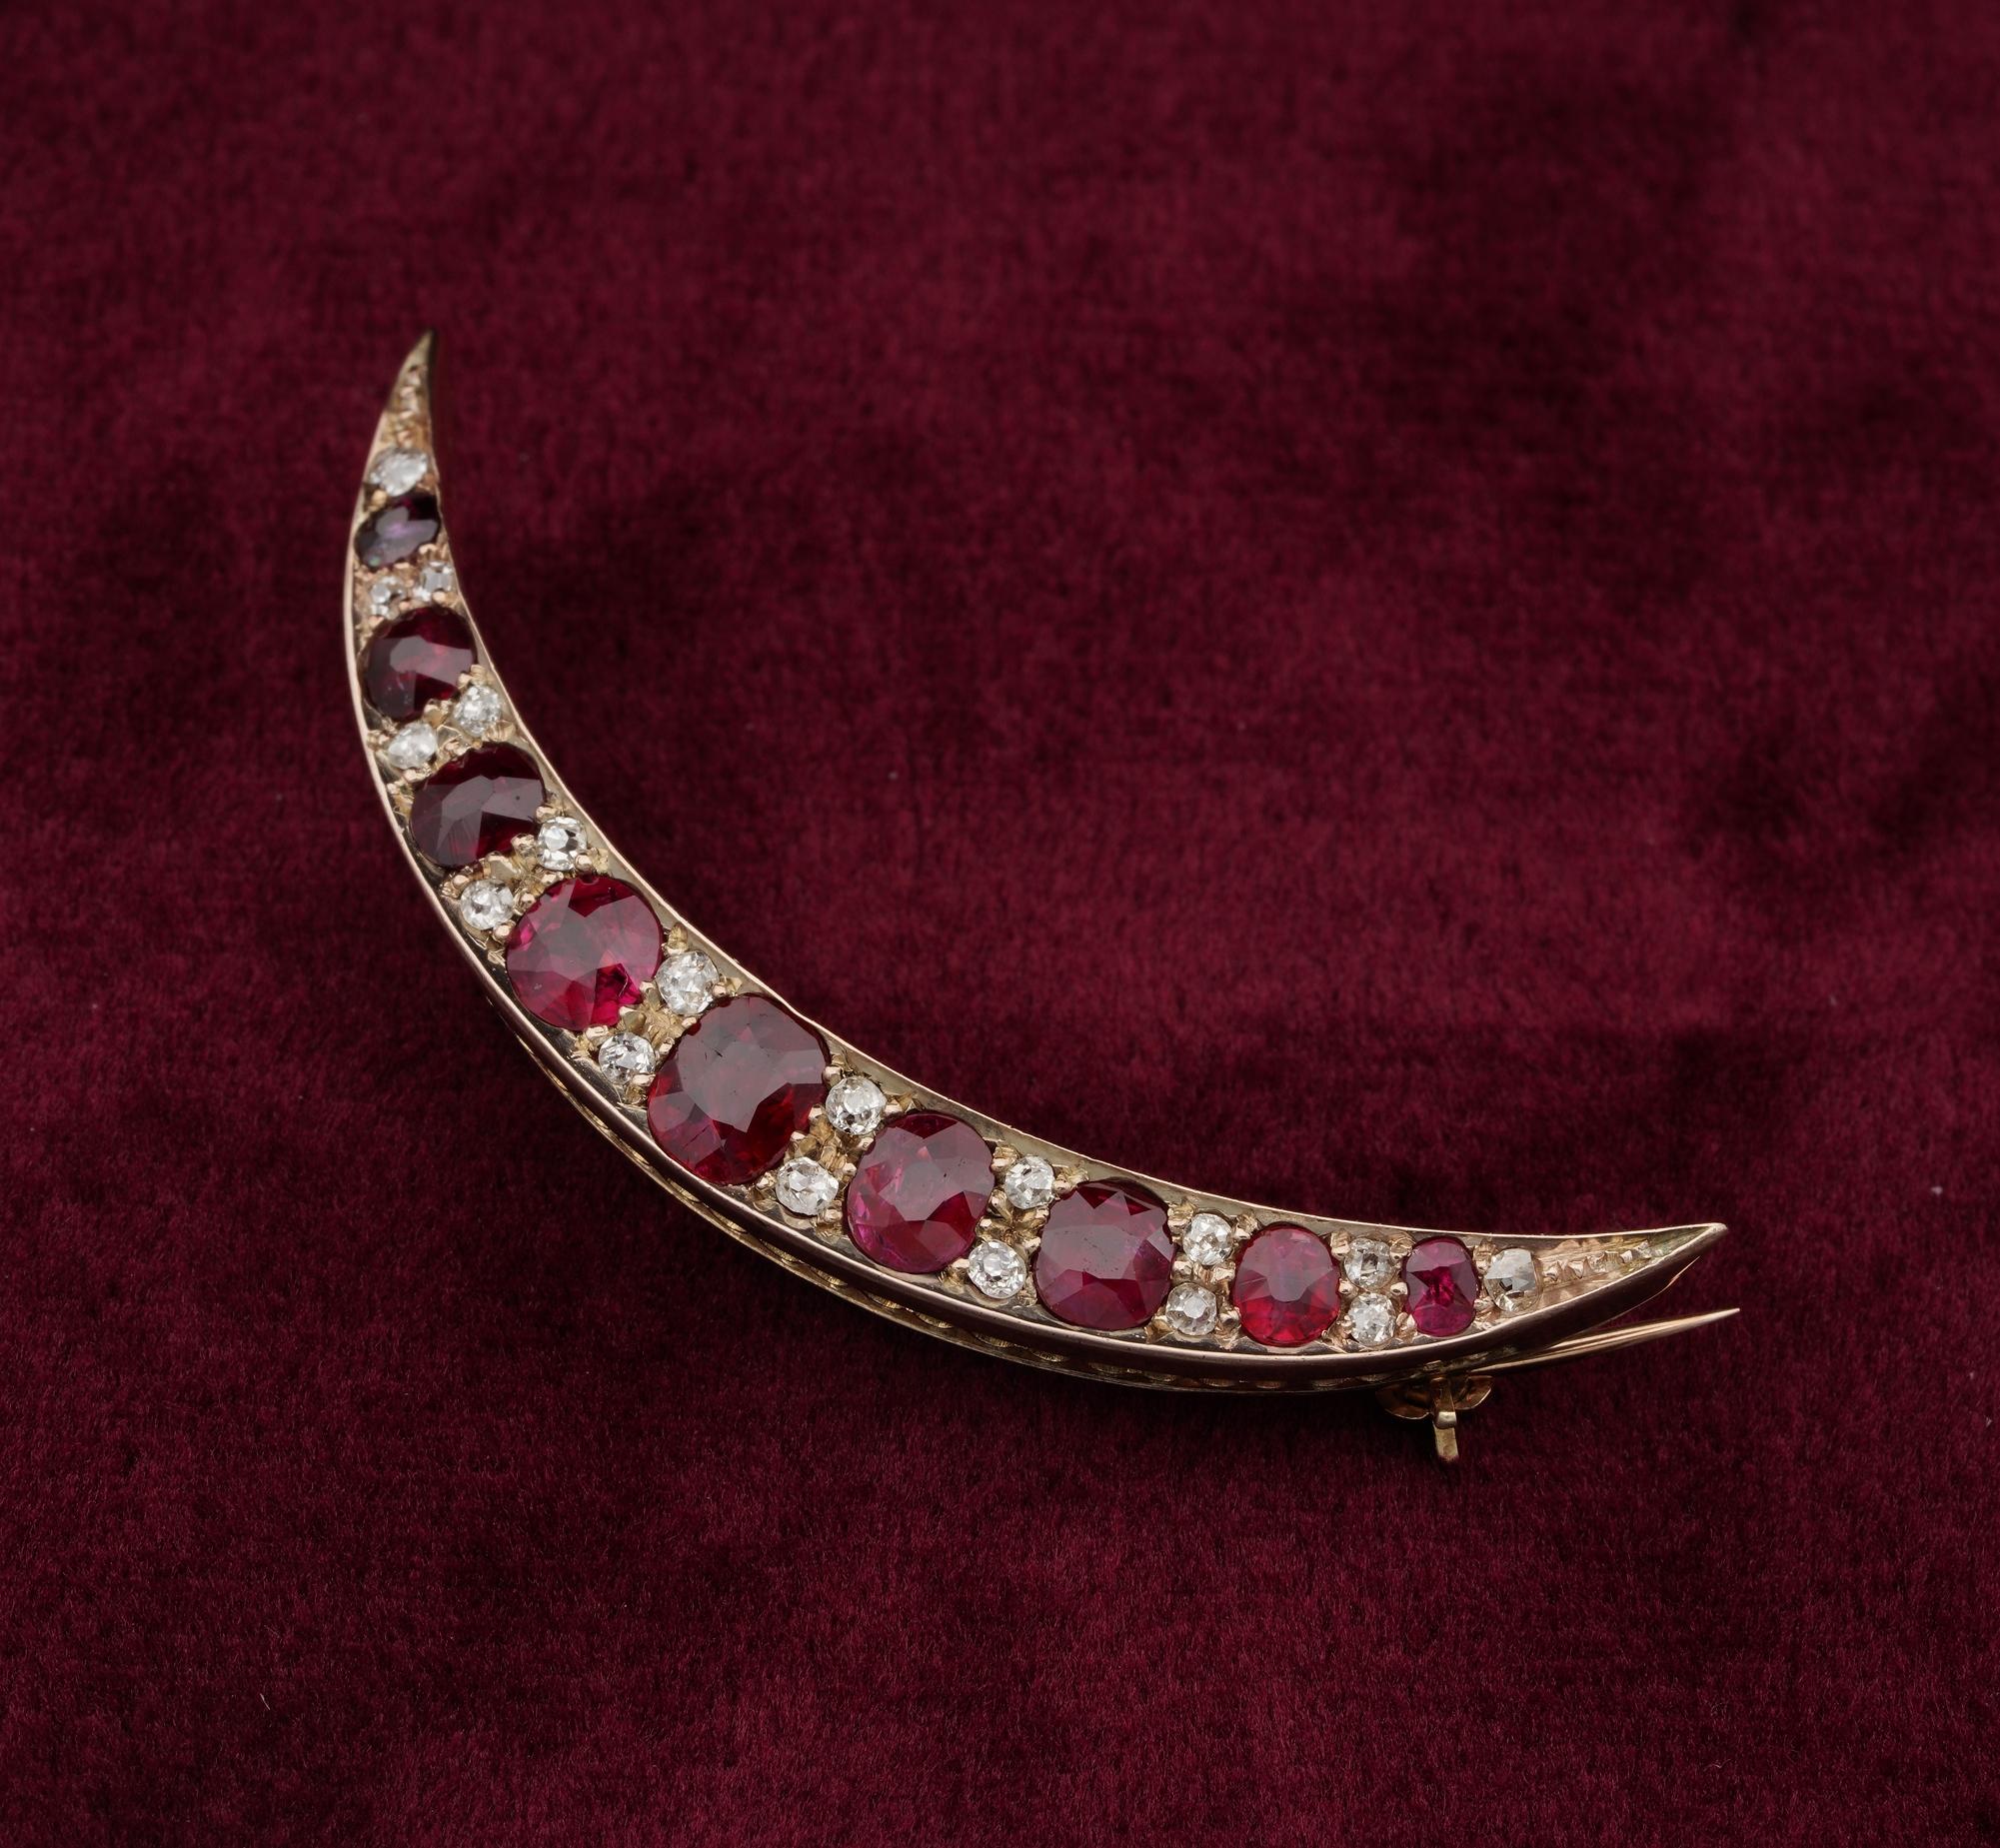 Magic and Mystery

Victorian Celestial motifs in jewellery were full of symbolism and good wishing
Crescent moon are a guidance in life, love and many others symbolism
This Stunning Victorian example is 1880 ca – beautifully hand crafted of solid 18